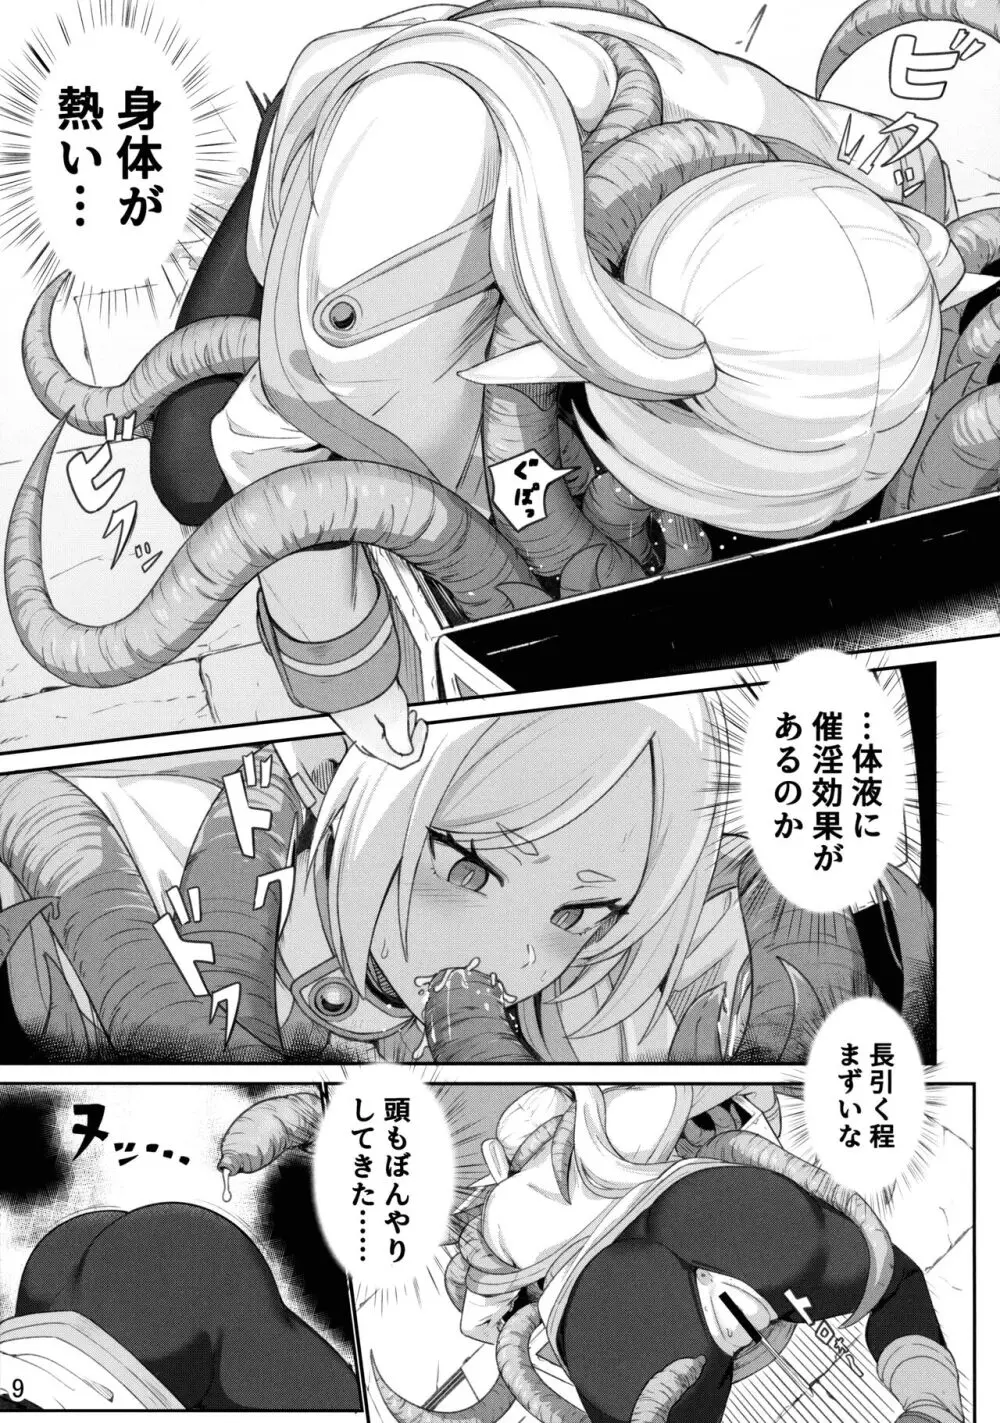 FRIEREN'S ちょっとHな本 Page.11